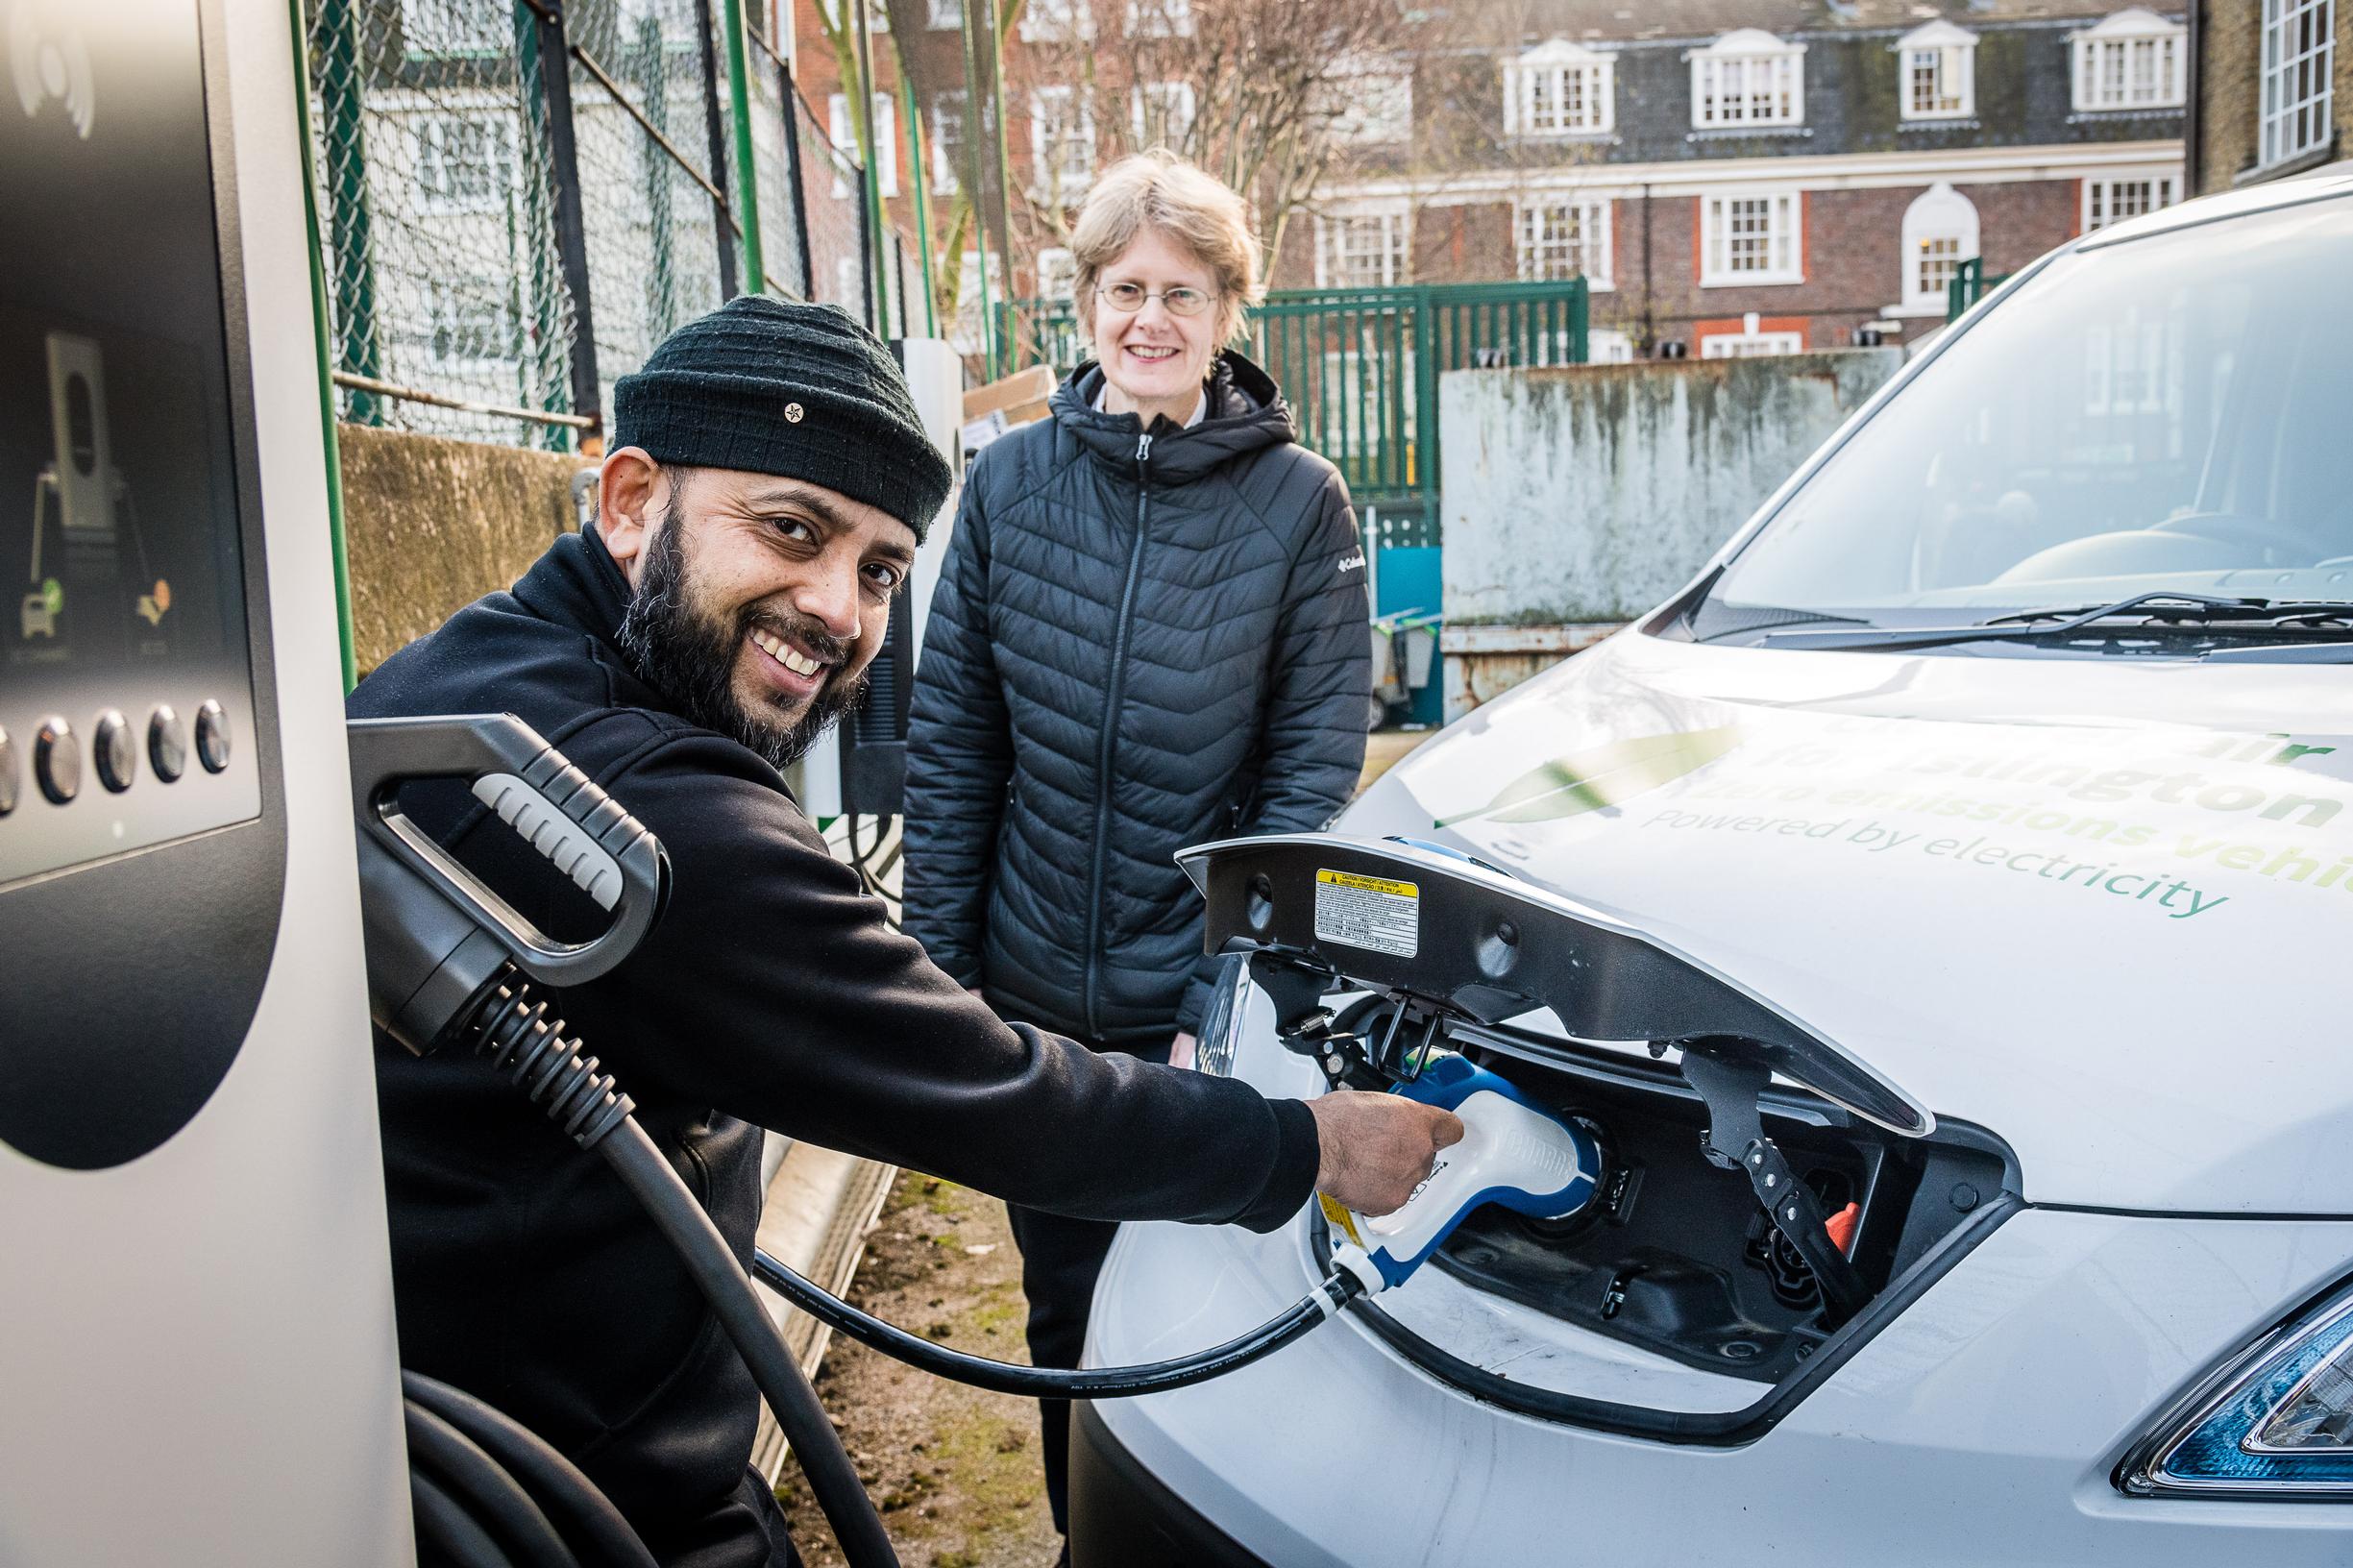 Rowena Champion (right): The changes that we’ve made – including our bold, pioneering decision to introduce a hierarchical charging system for electric vehicles – ensure that parking charges more accurately reflect the pollution they create